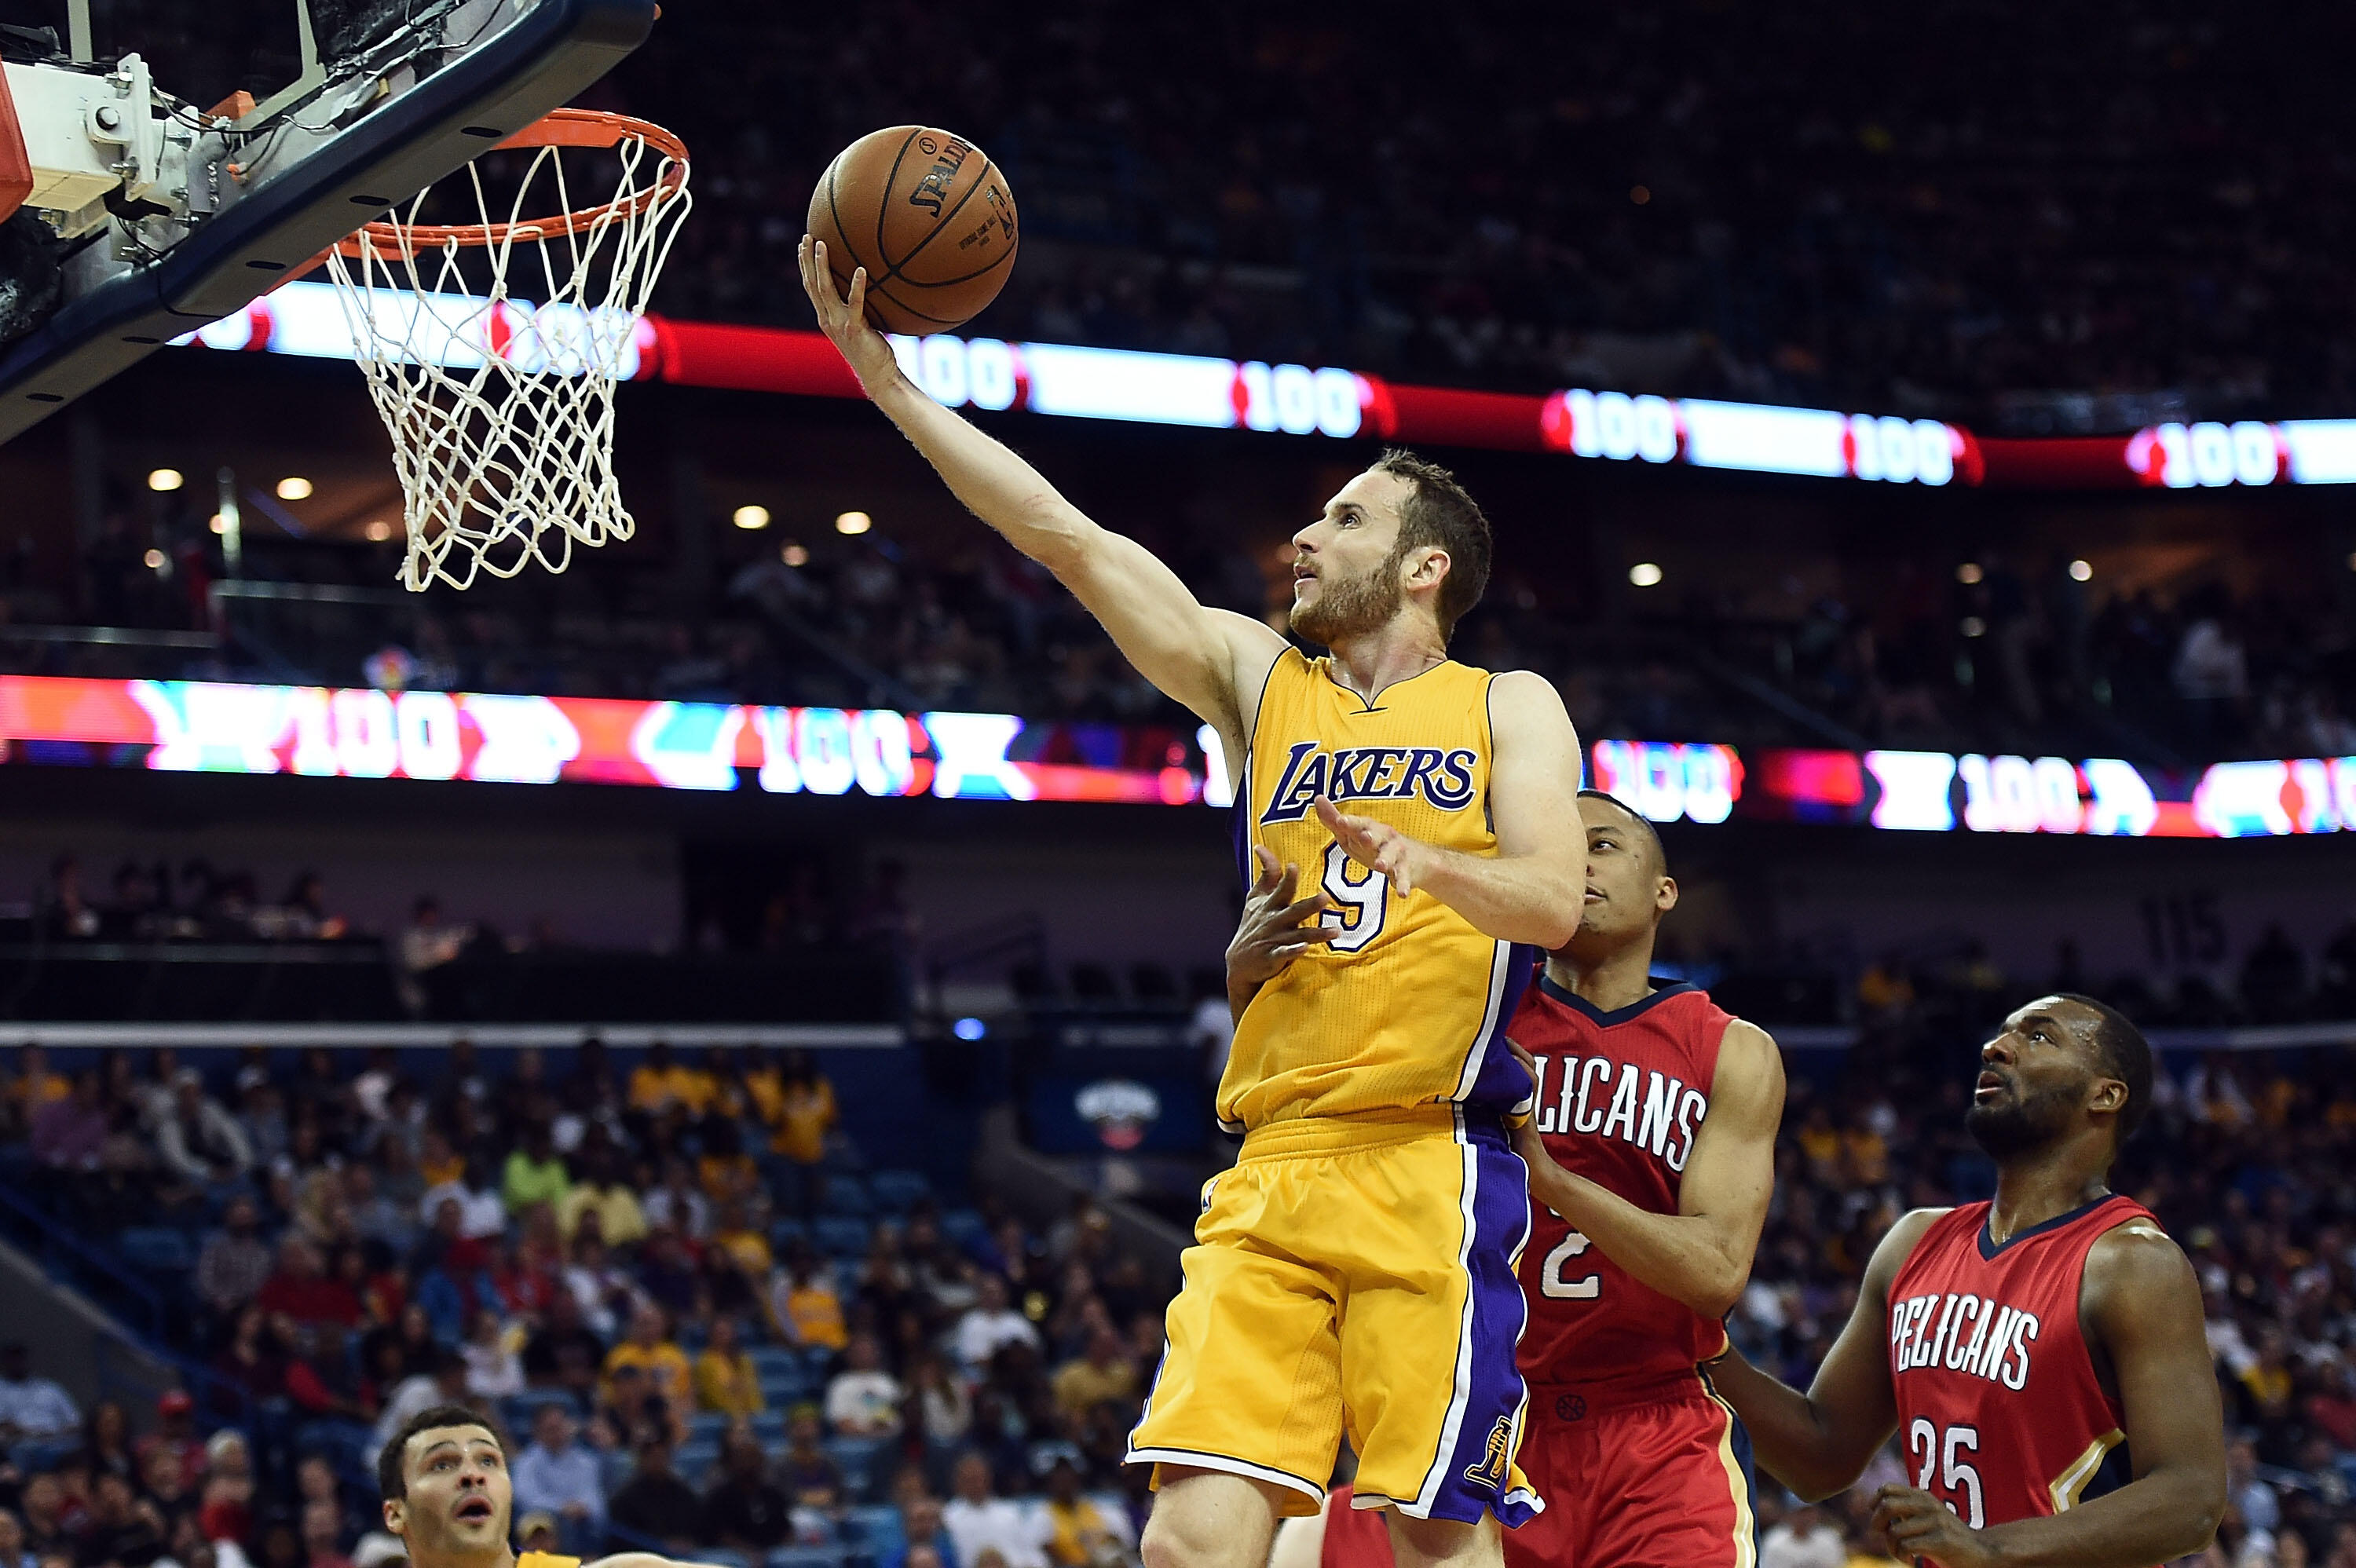 NEW ORLEANS, LA - APRIL 08: Marcelo Huertas #9 of the Los Angeles Lakers is fouled by Tim Frazier #2 of the New Orleans Pelicans during the second half of a game at the Smoothie King Center on April 8, 2016 in New Orleans, Louisiana. NOTE TO USER: User ex